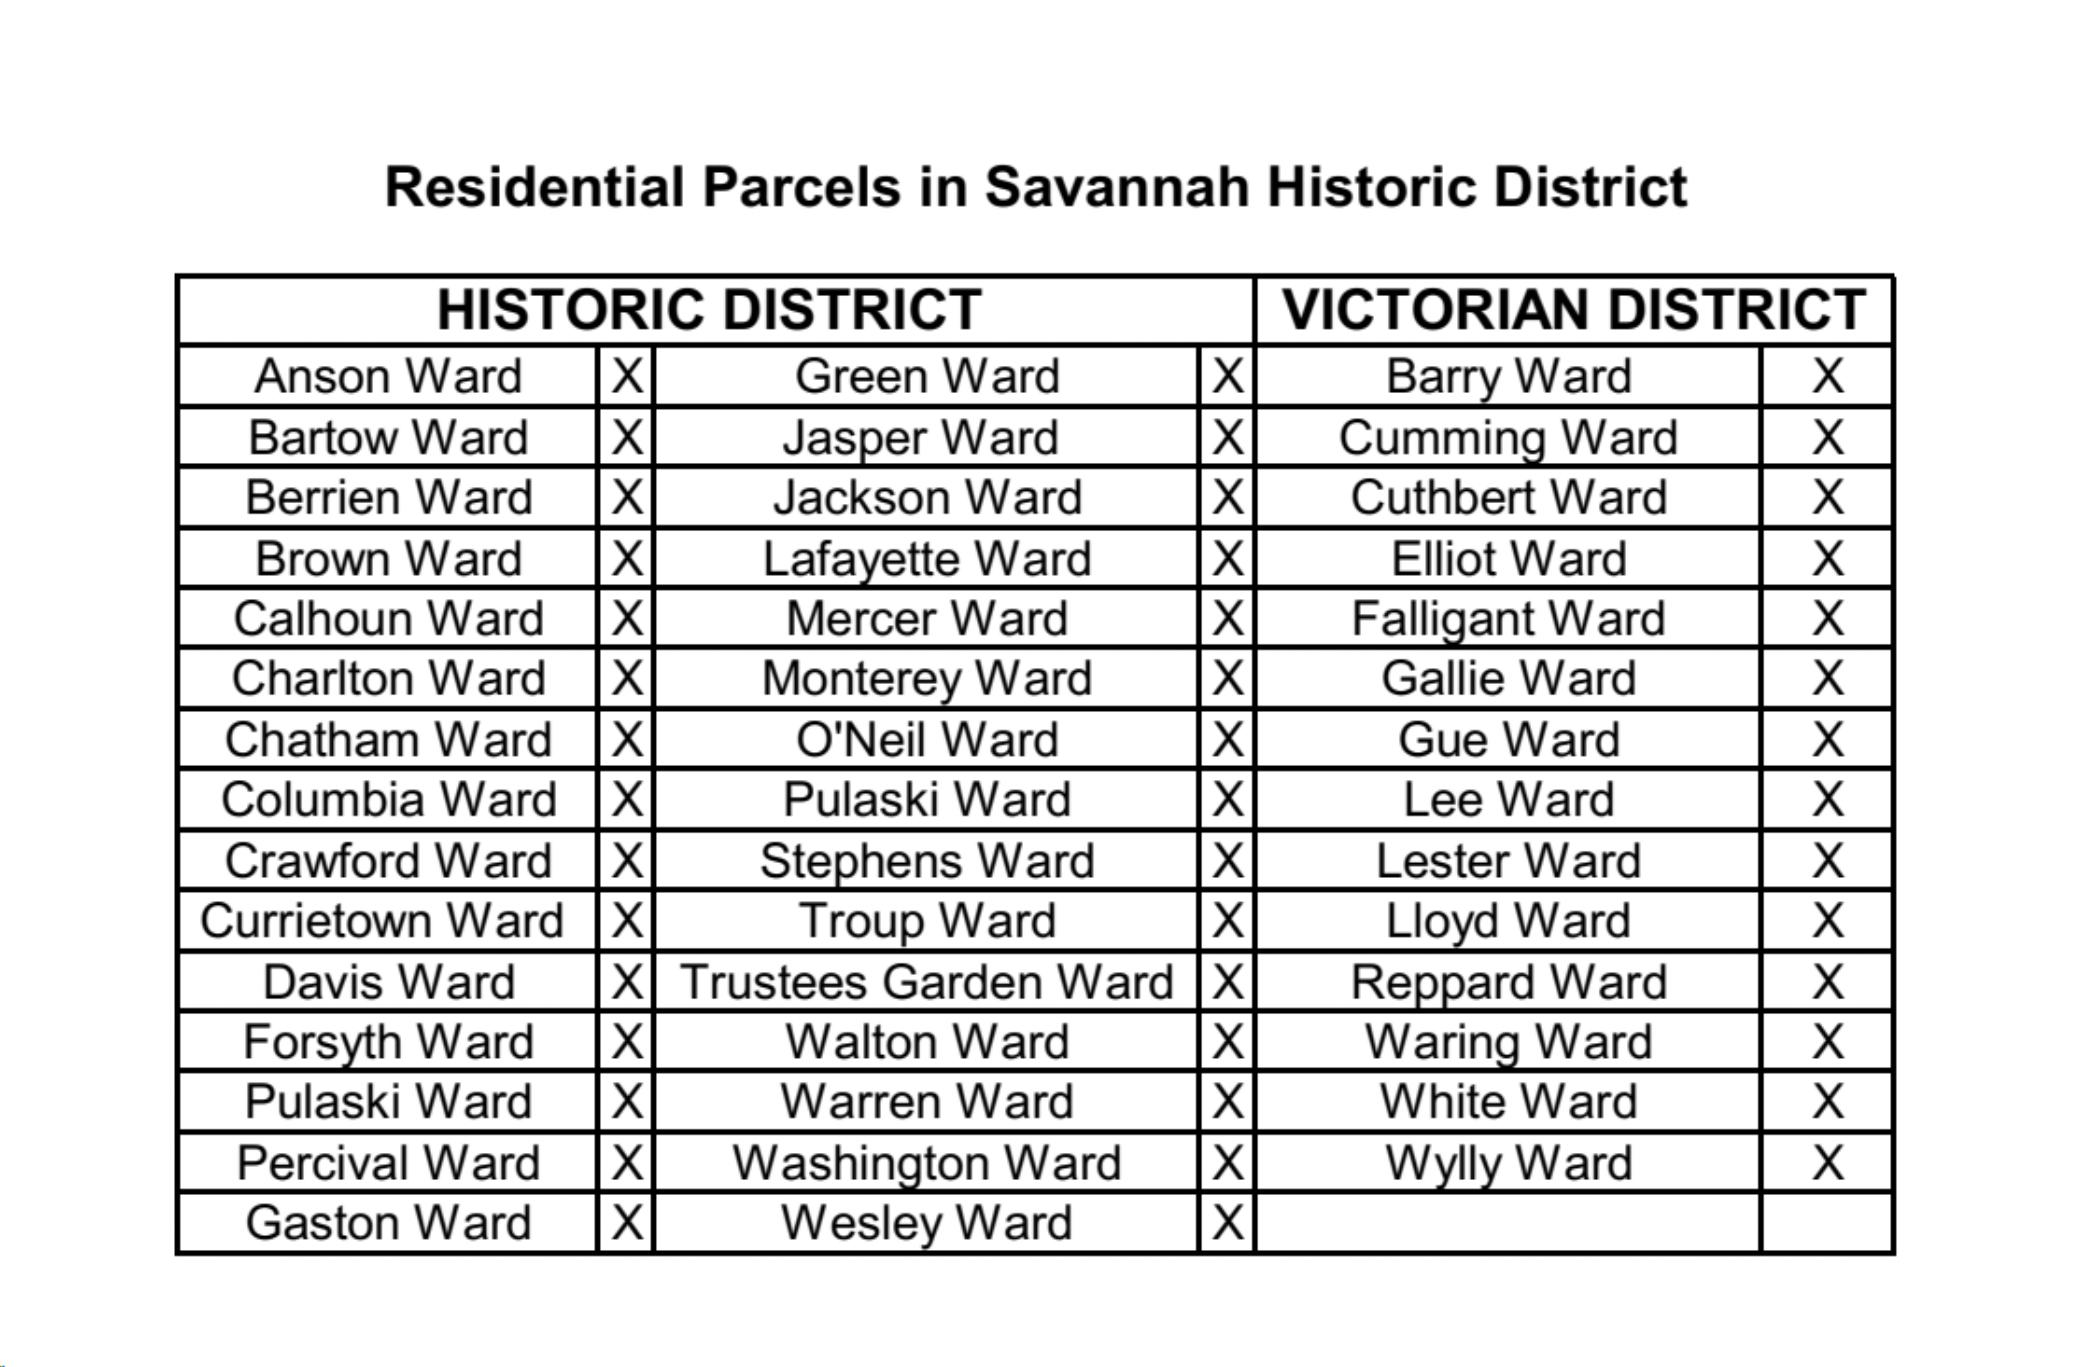 Residential Parcels in Savannah Historic district